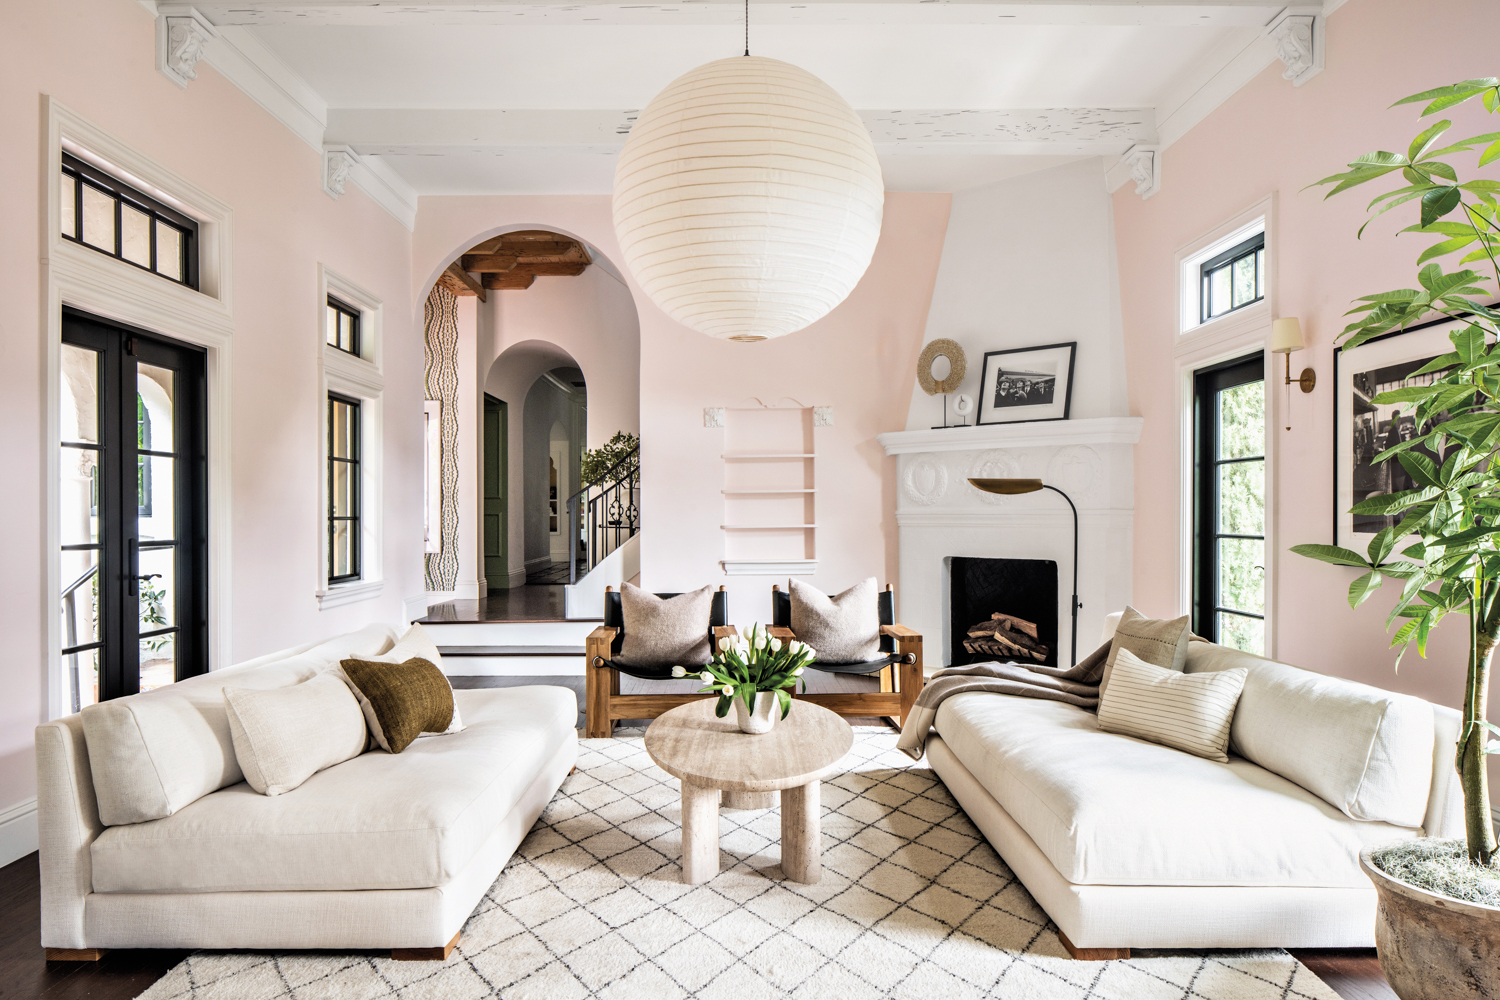 light pink living space with while couches and round lighting fixture